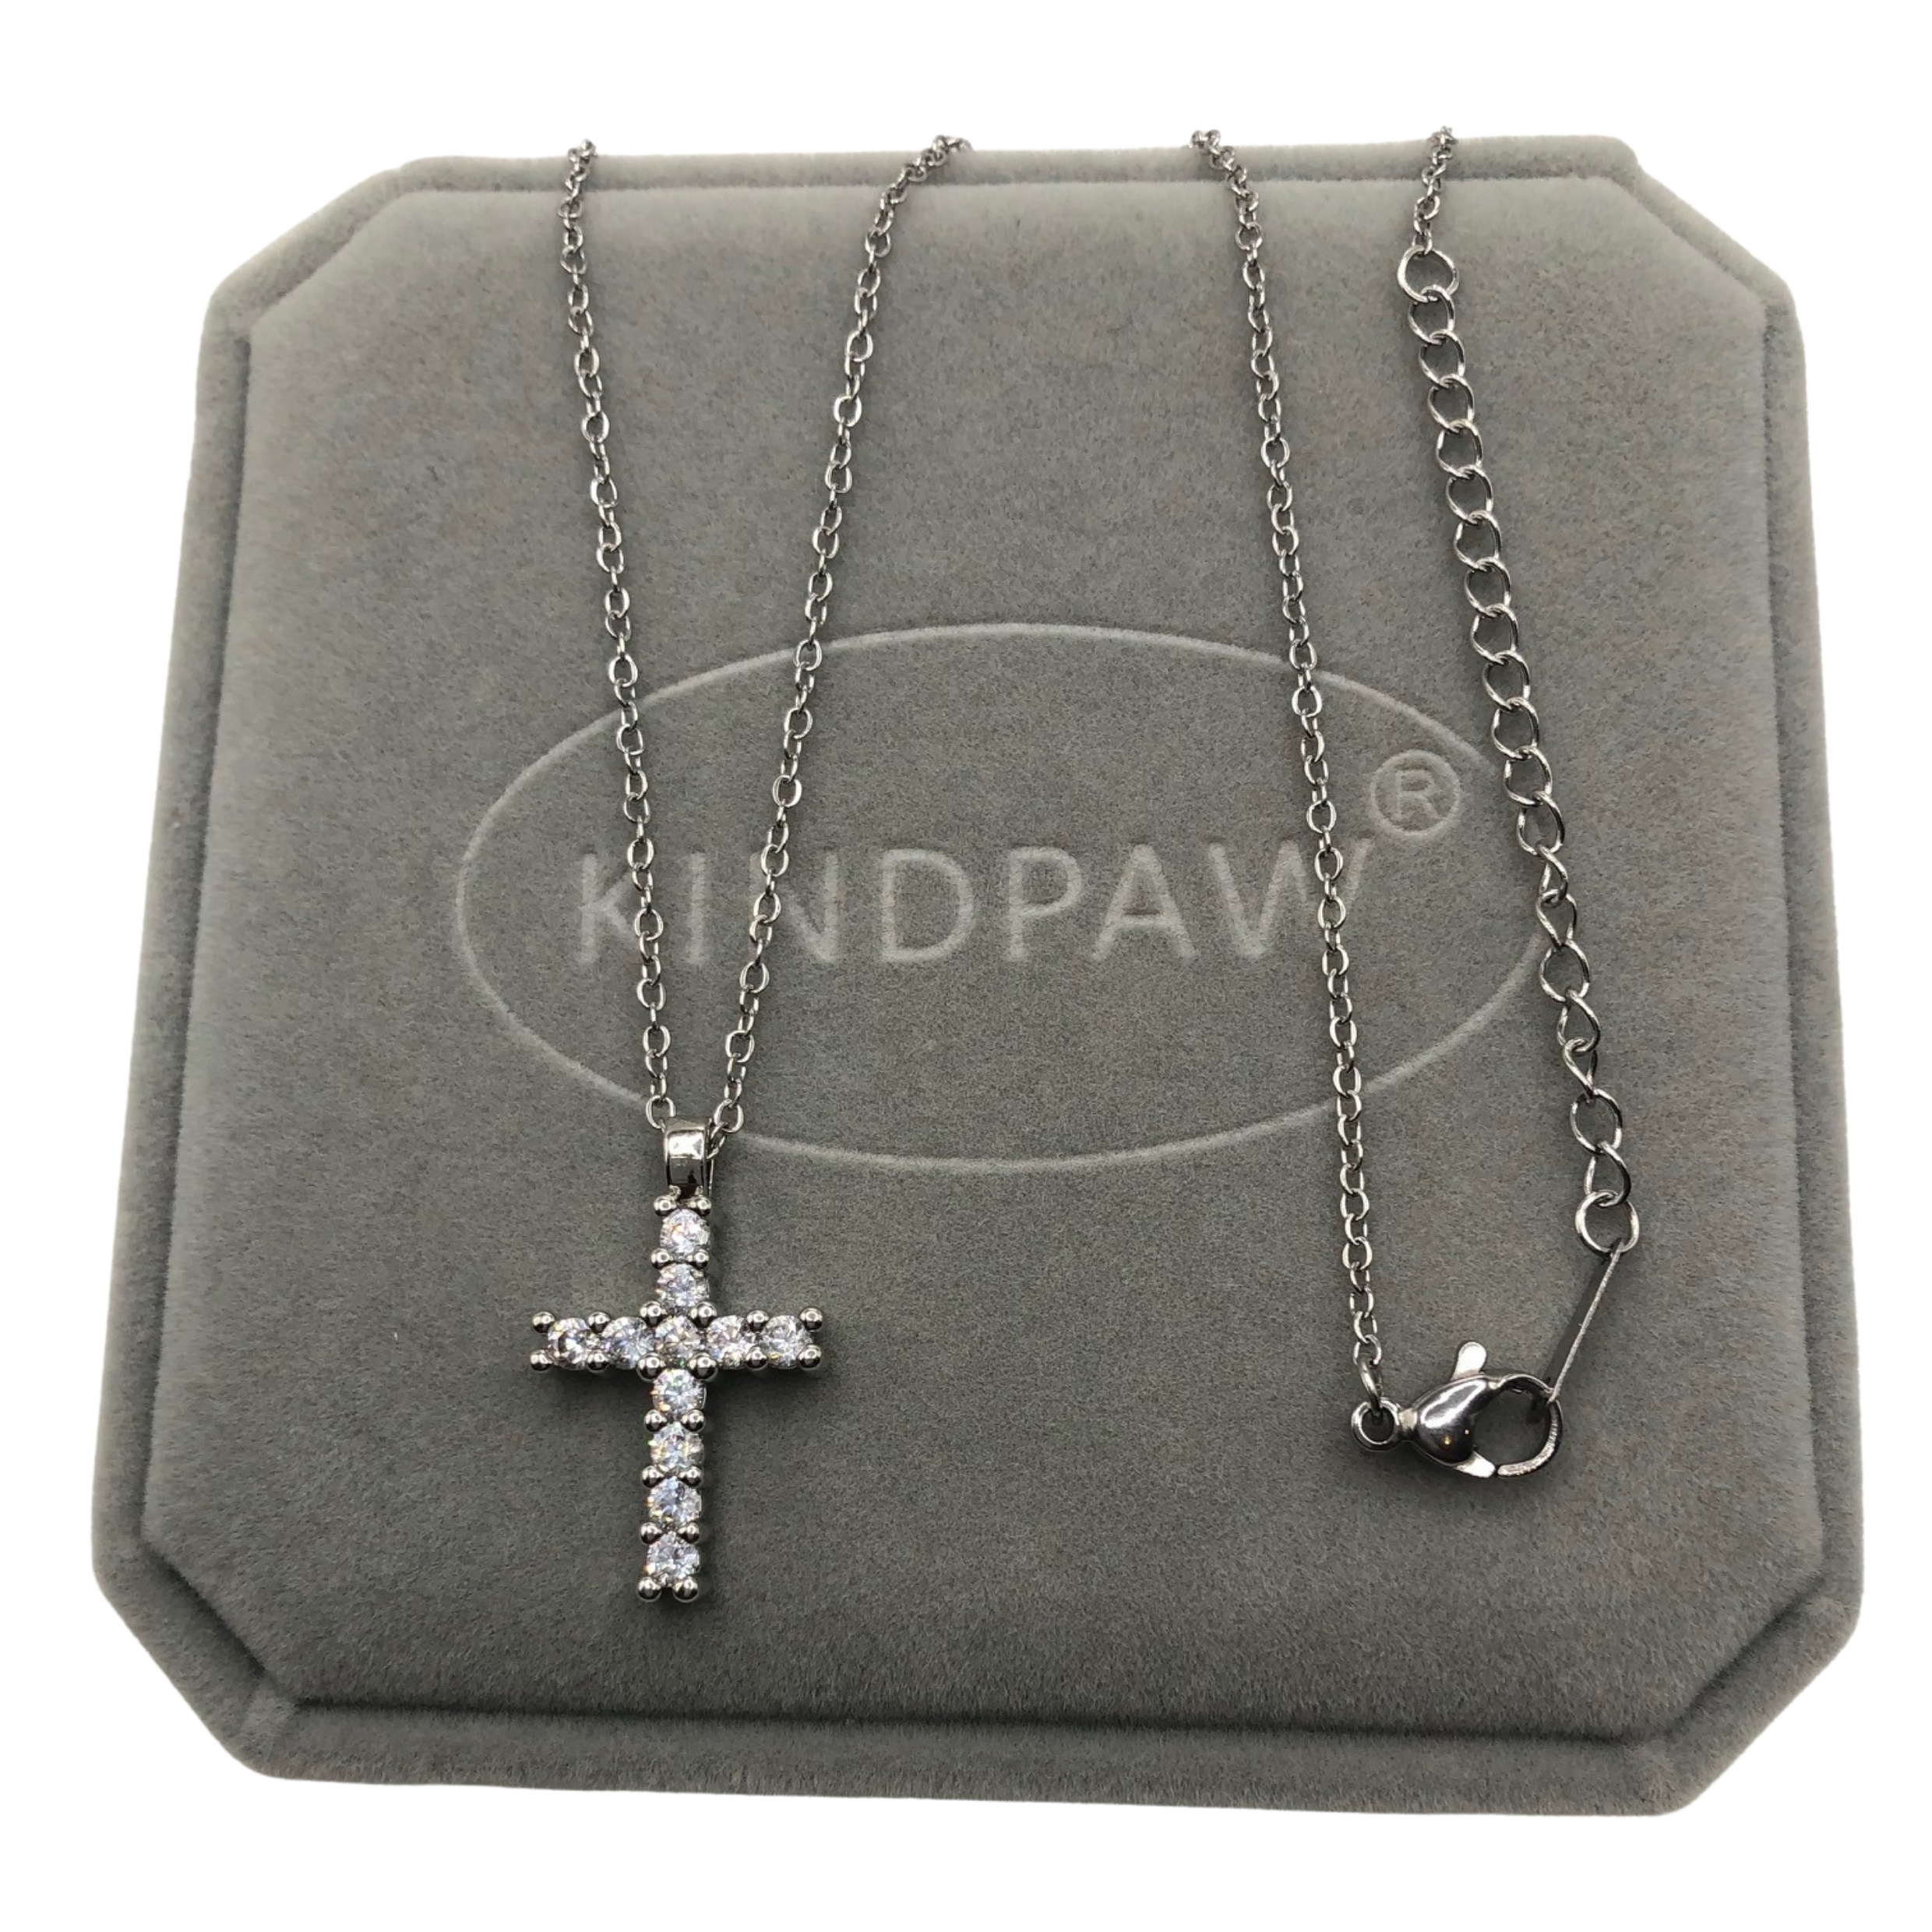 KINDPAW Cross Necklace For Girls - Cute Cross Pendant Necklace For Daughter From Mom and Dad